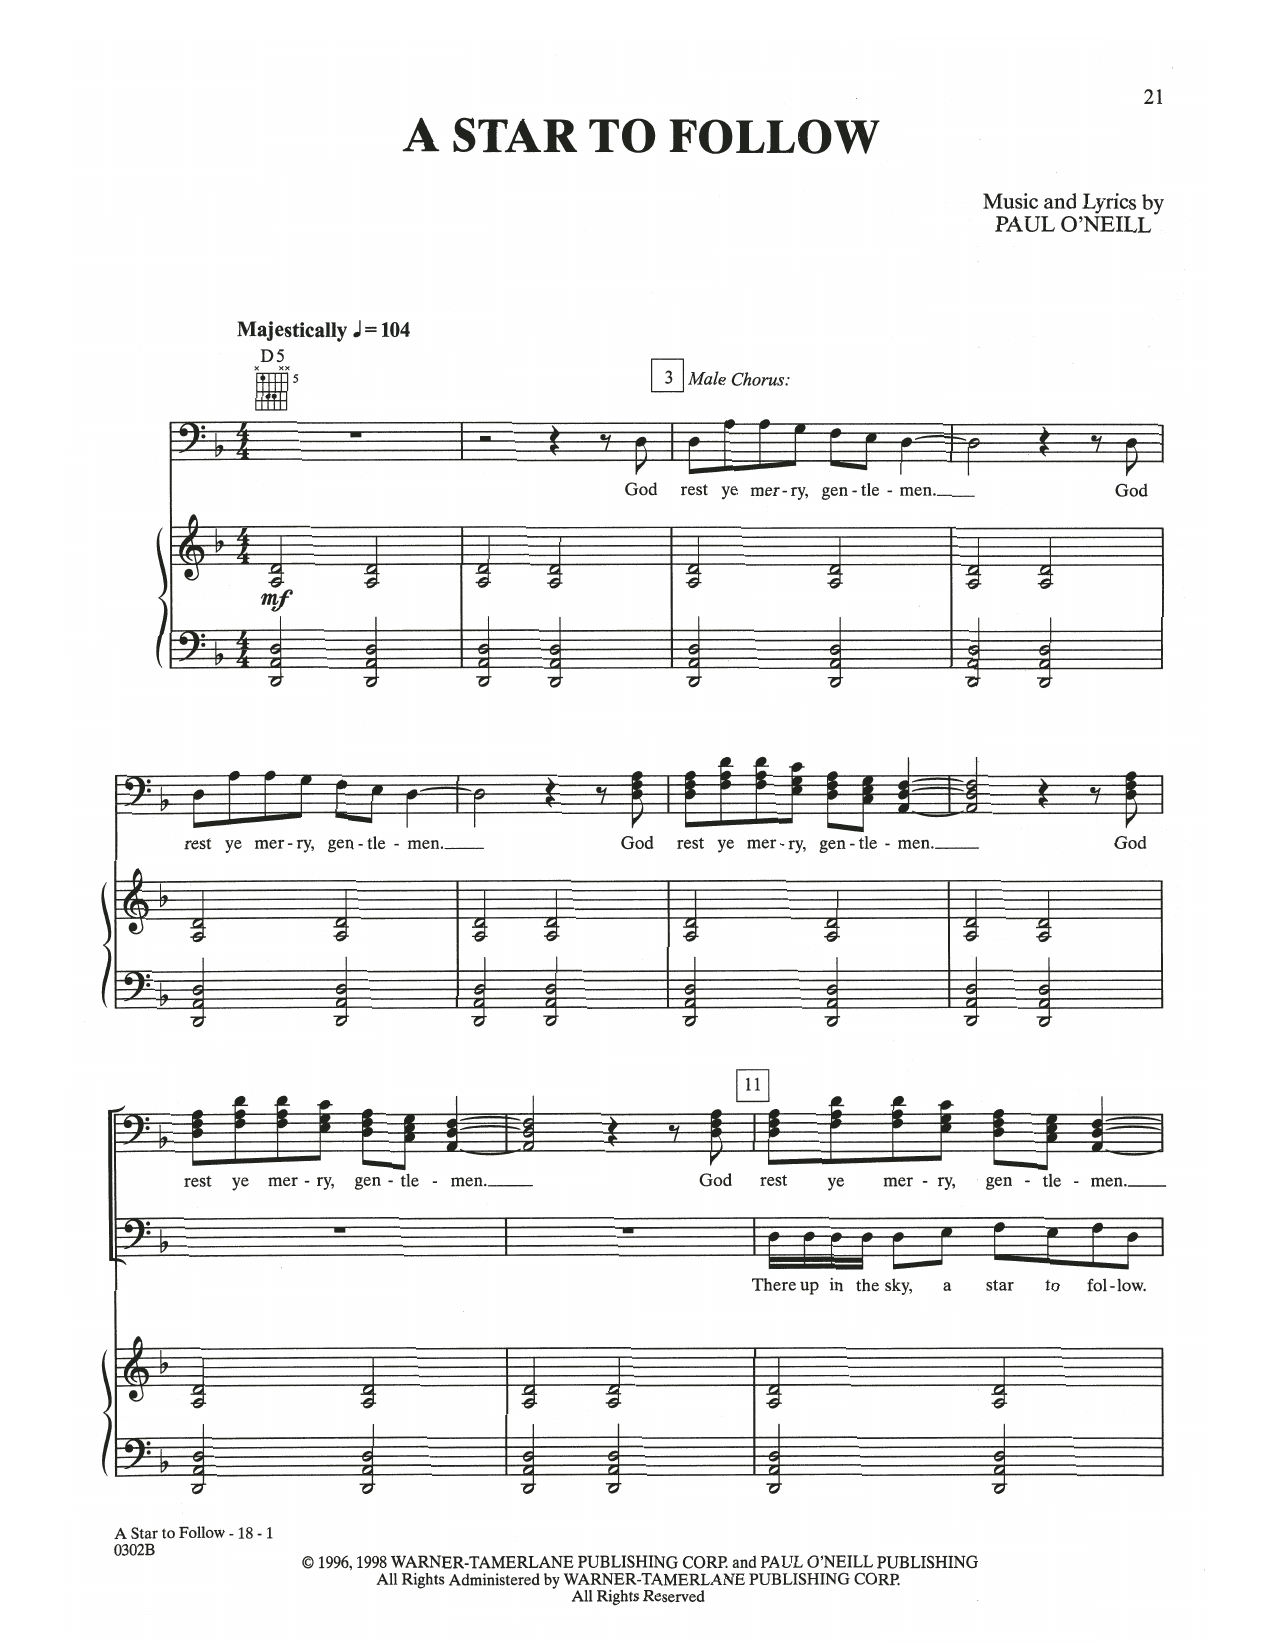 Download Trans-Siberian Orchestra A Star To Follow Sheet Music